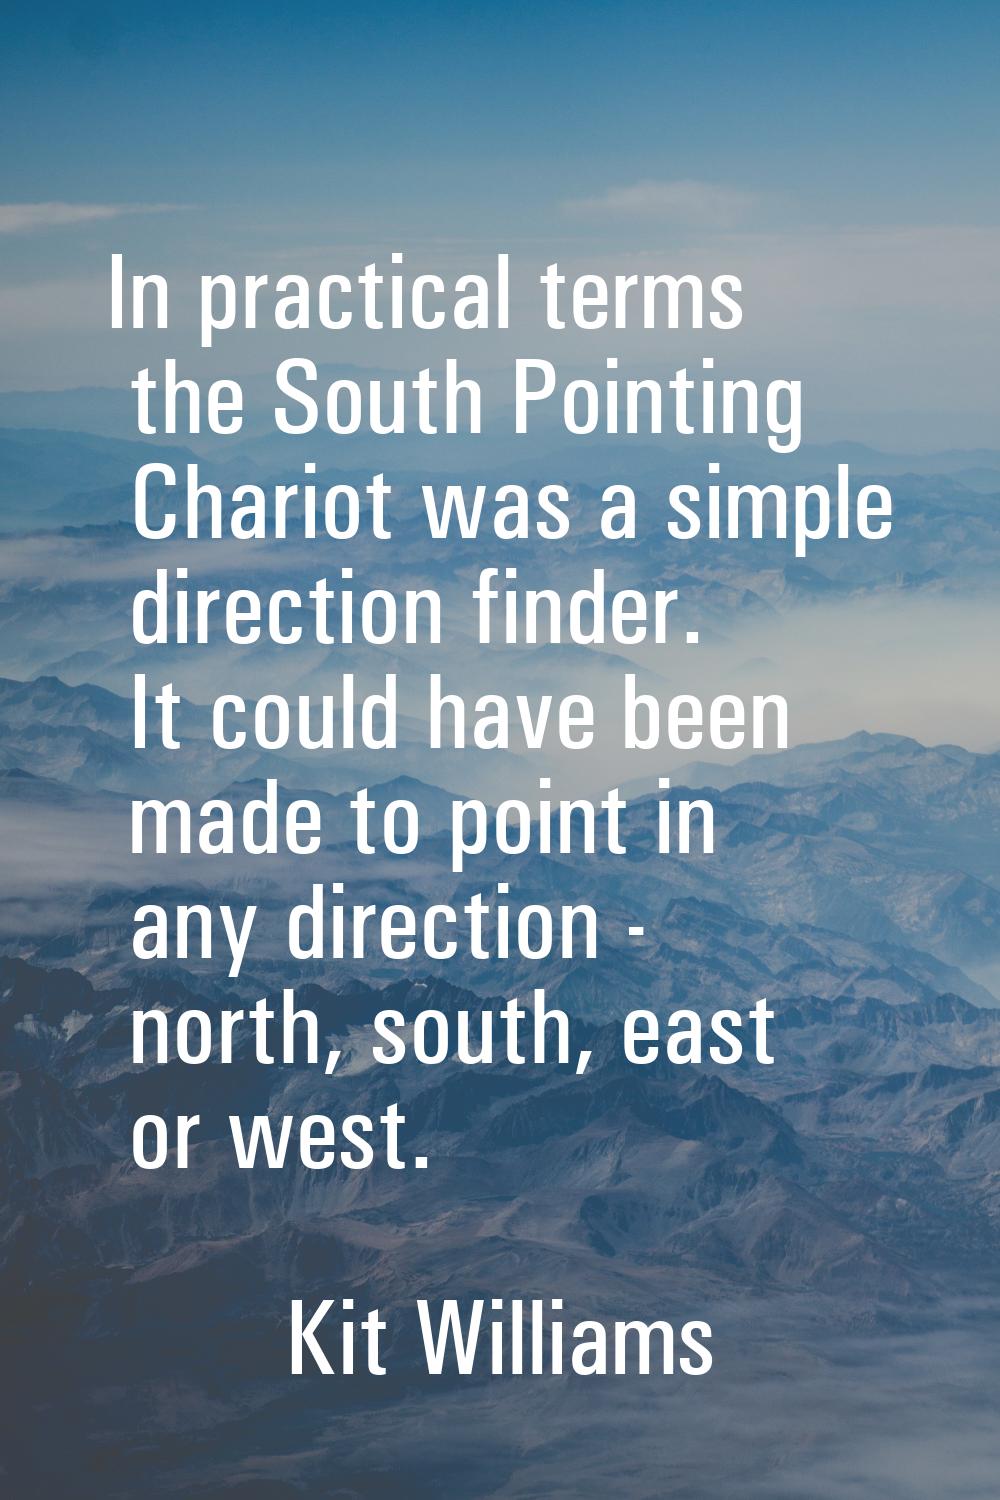 In practical terms the South Pointing Chariot was a simple direction finder. It could have been mad